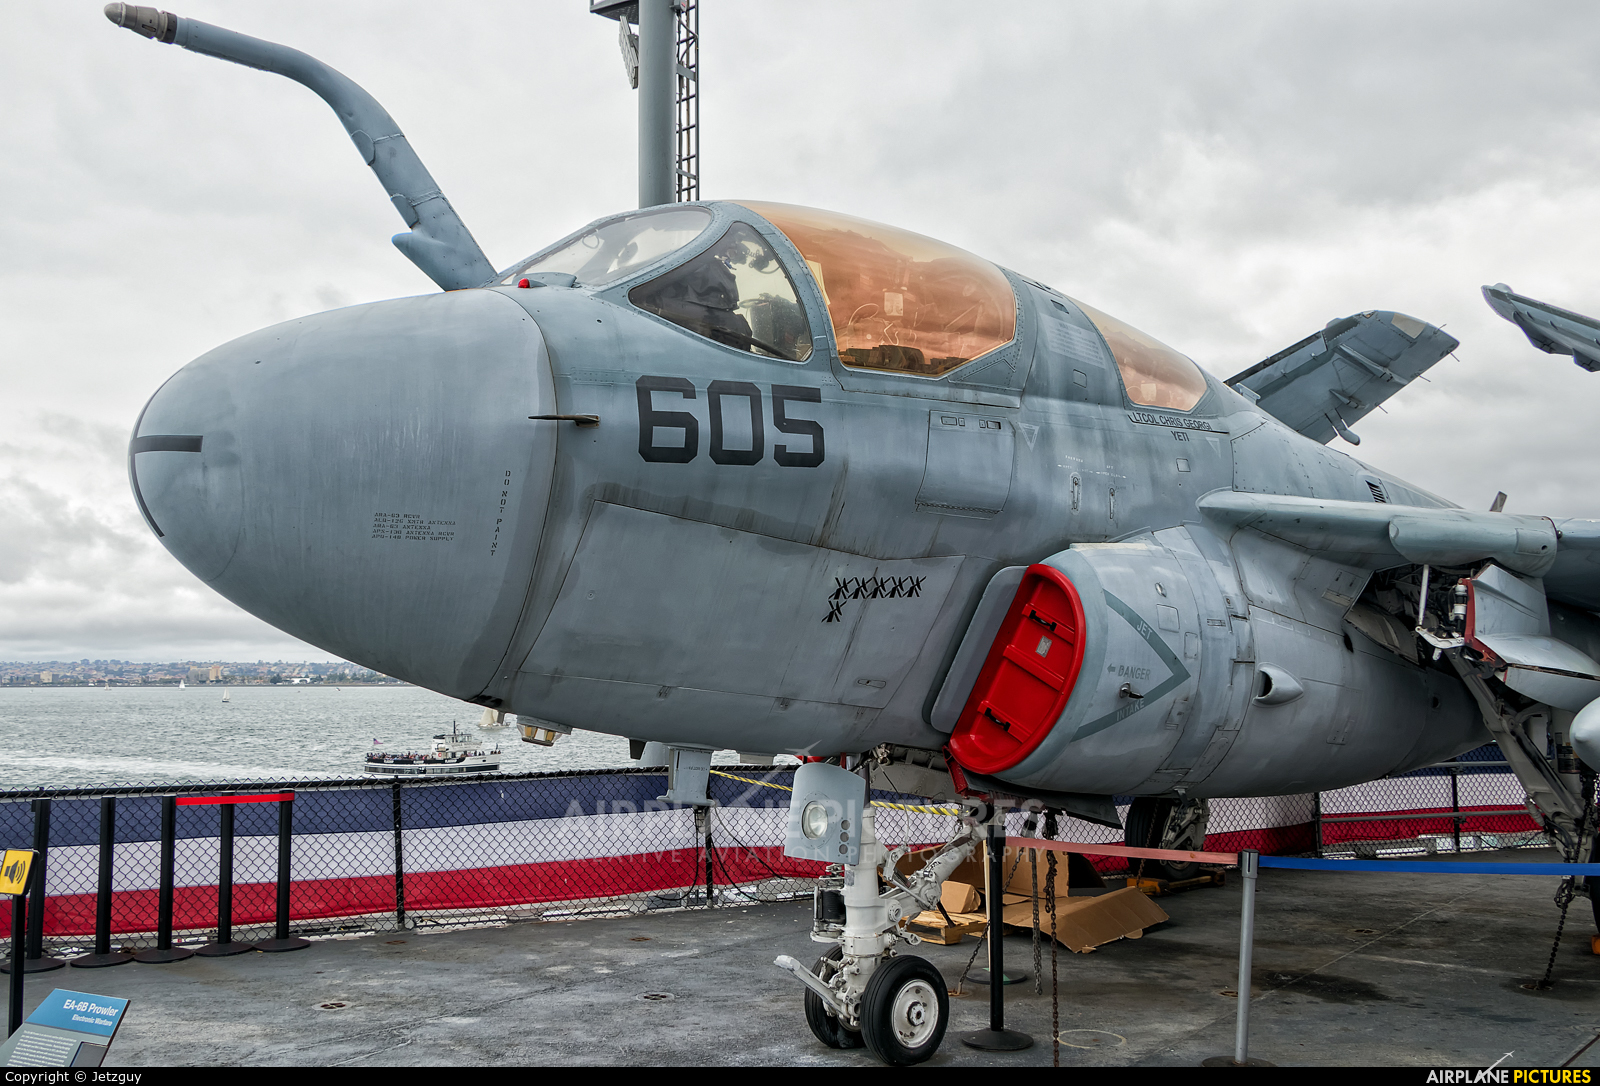 USA - Navy 162935 aircraft at San Diego - USS Midway Museum